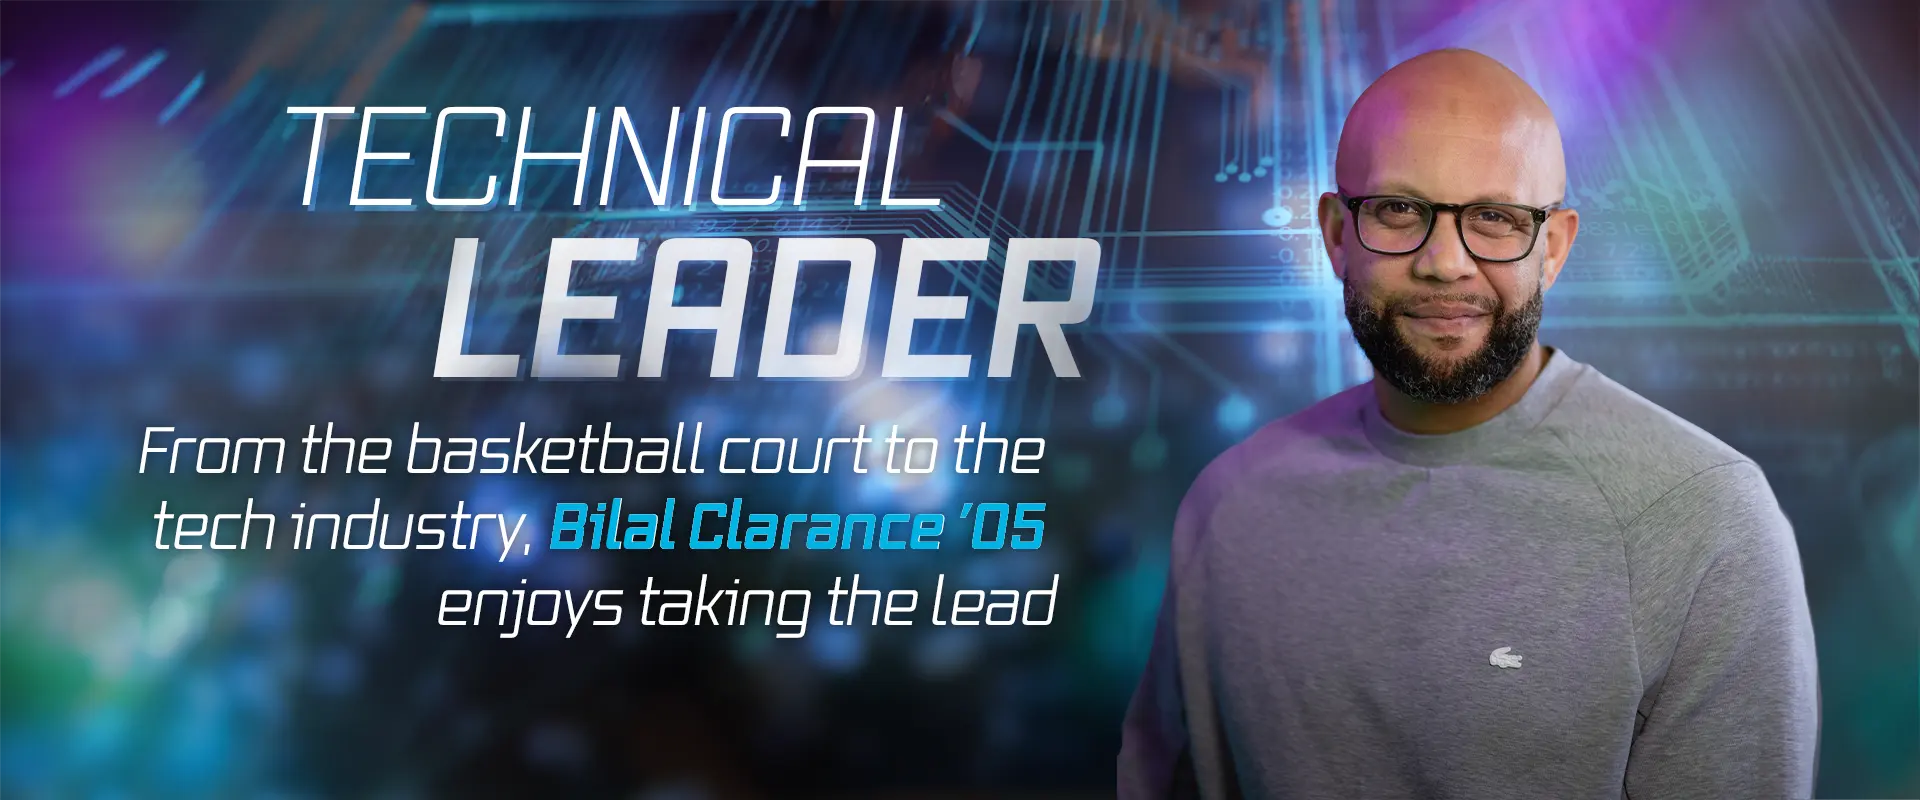 TECHNICAL LEADER From the basketball court to the tech industry, Bilal Clarance ’05 enjoys taking the lead